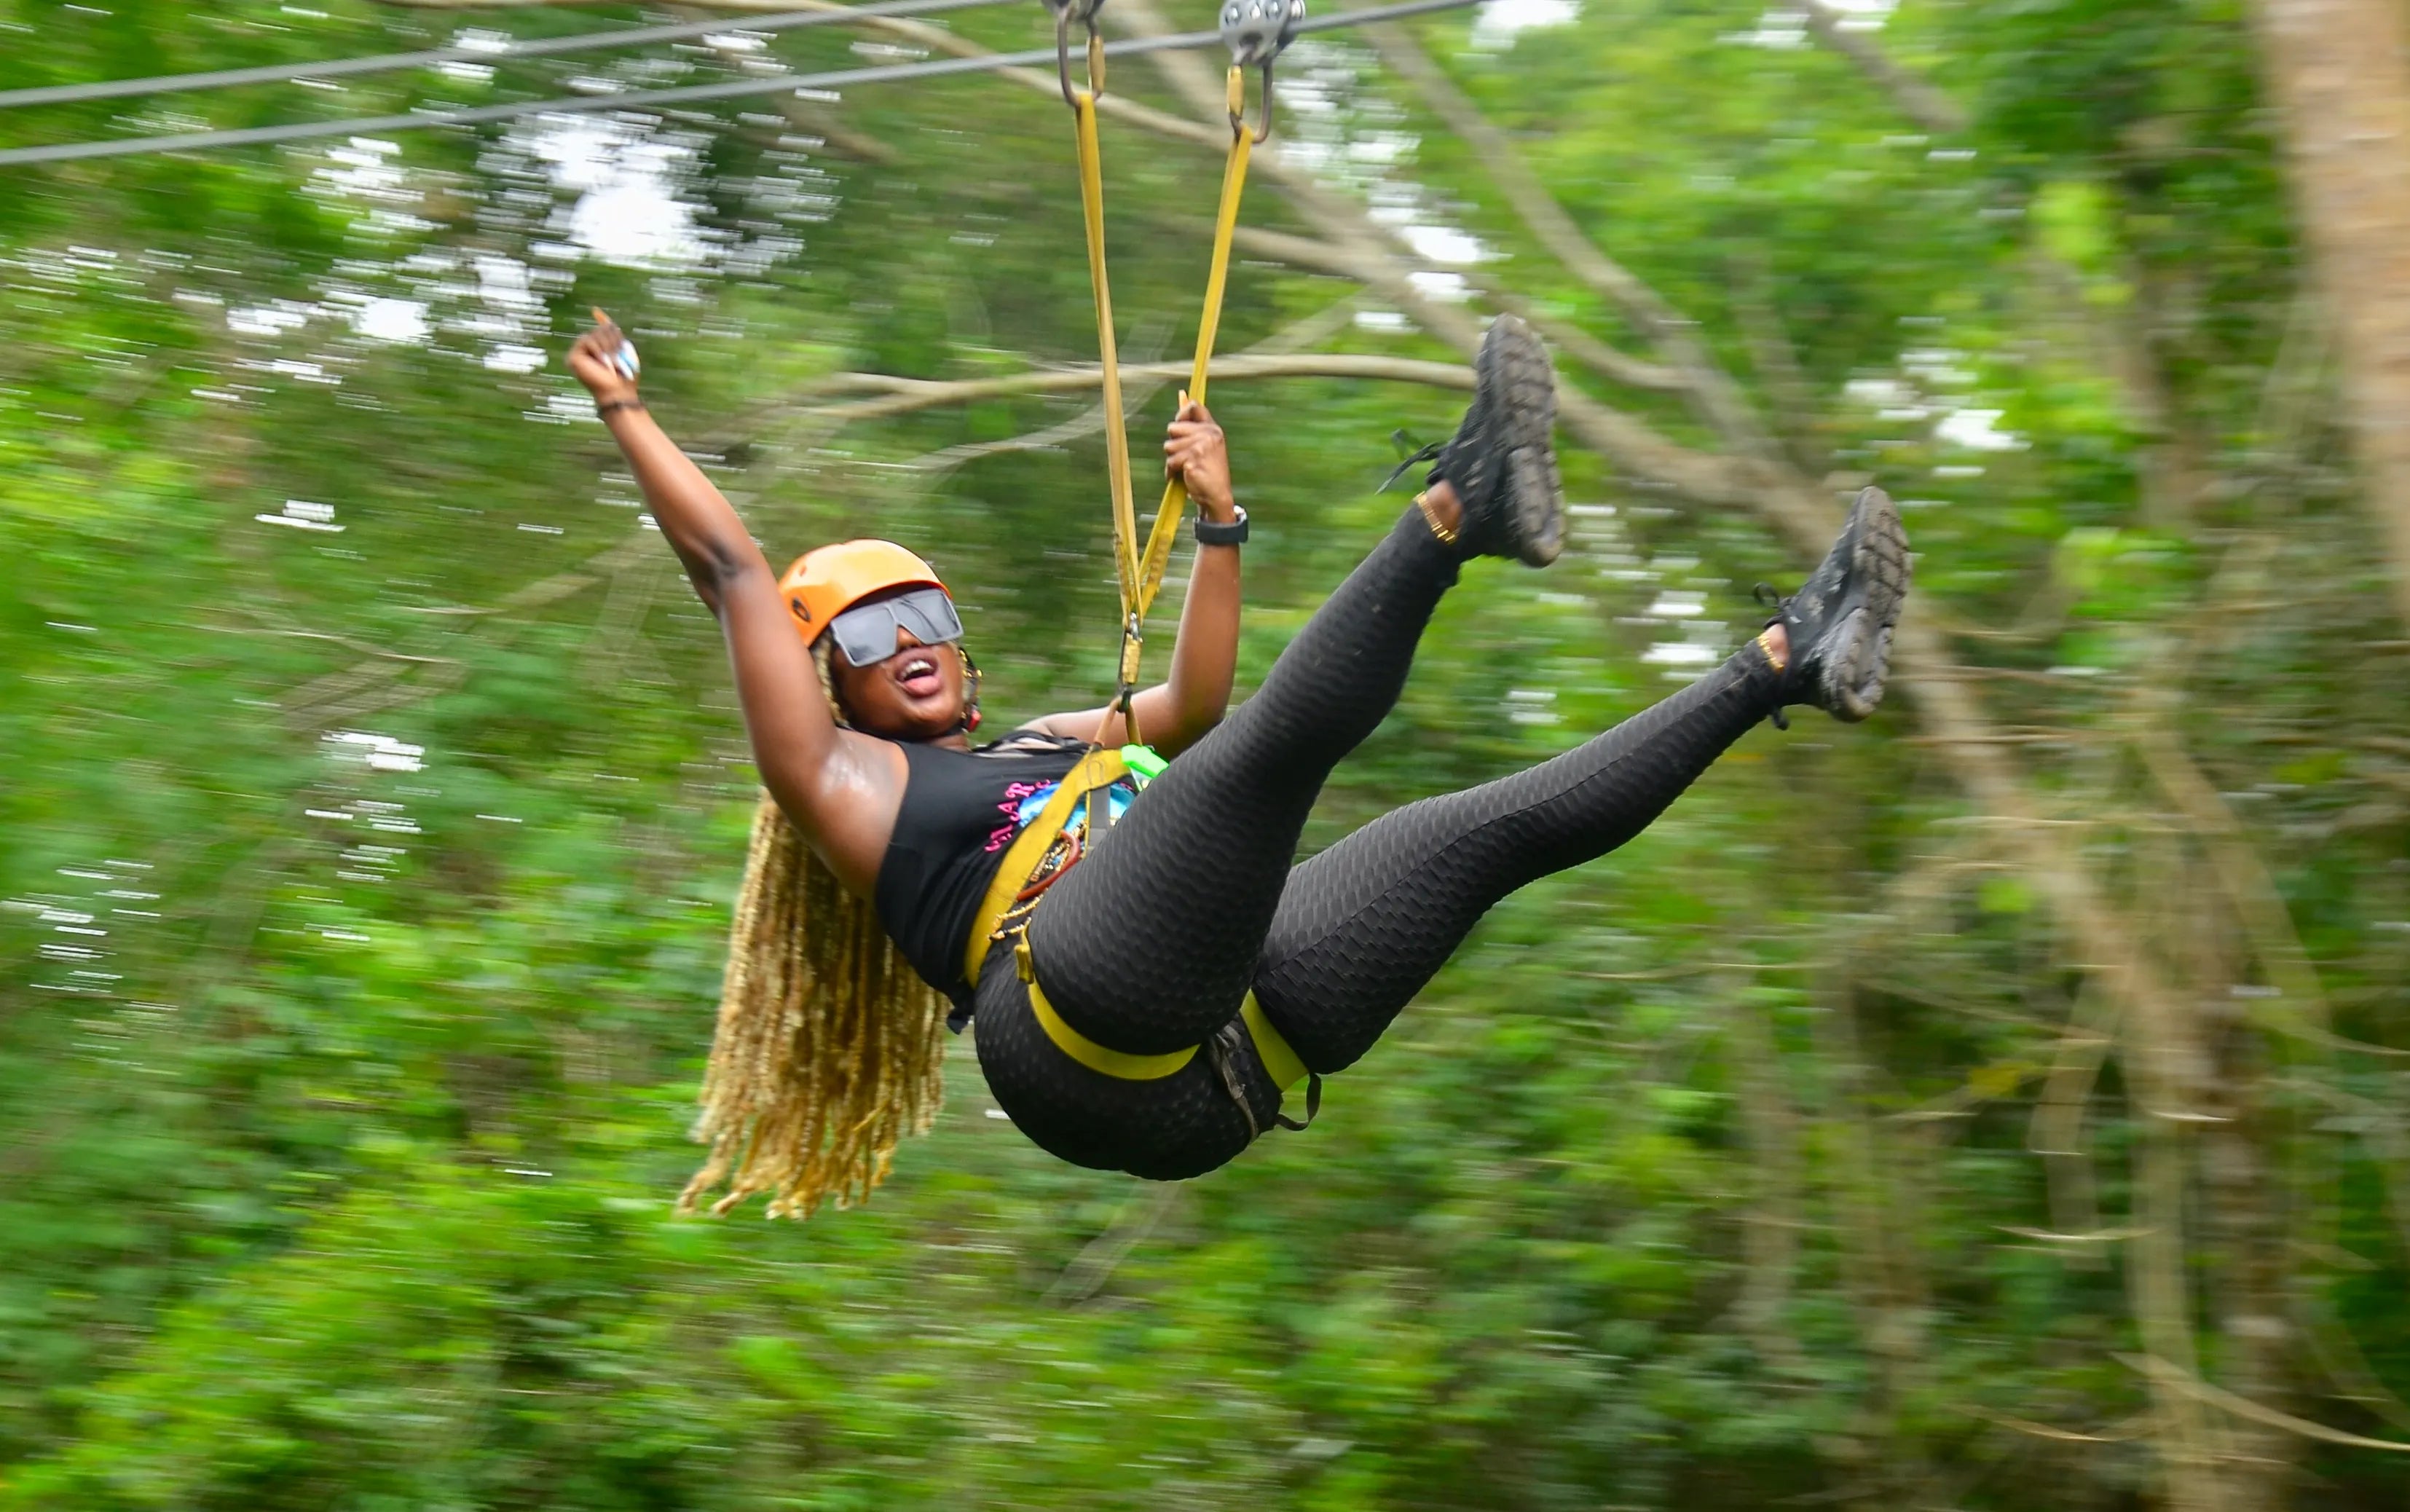 Experience the Ultimate ATV Air Adventure: Rappel, Zip Line, and More! 🌬️🪂 Buckle up for an adrenaline-packed day with ATV vertical descents, three thrilling zip lines, Mayan ceremonies, jungle exploration, and a mouthwatering Mexican buffet. Dive into an enchanting cave cenote – a true natural wonder! 🏊‍♂️💦 Join us for an adventure-packed day, guided by knowledgeable experts. Unleash the explorer in you! 🌏🌟 #ATVAirAdventure #CaveCenoteExploration #MayanCultureExperience